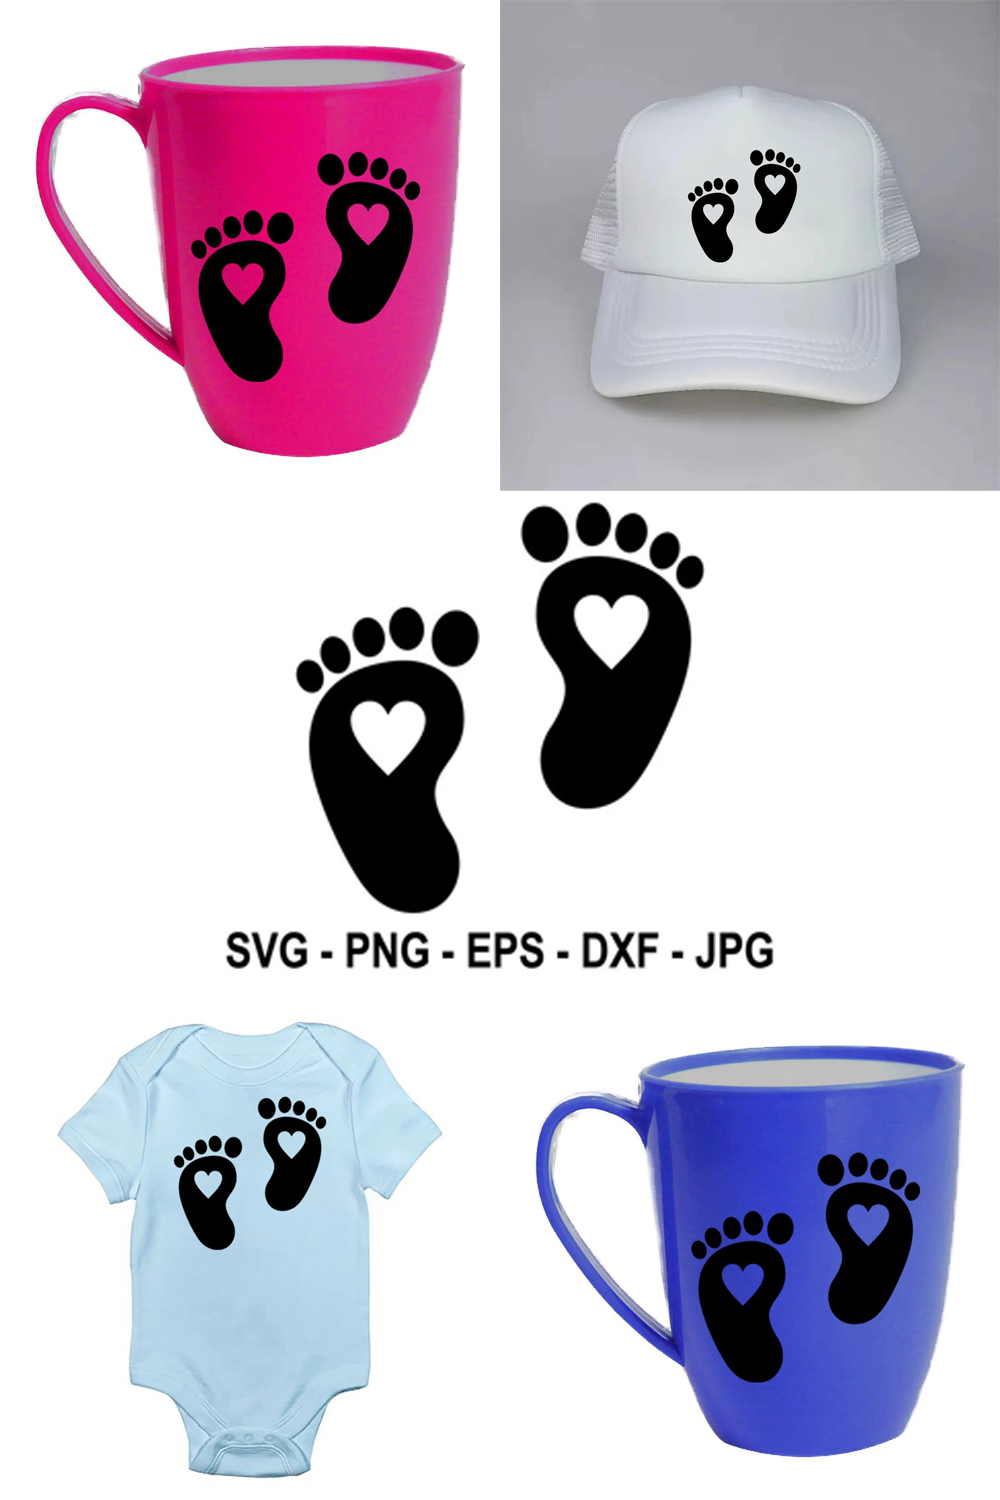 Children's footprints with hearts in the image.